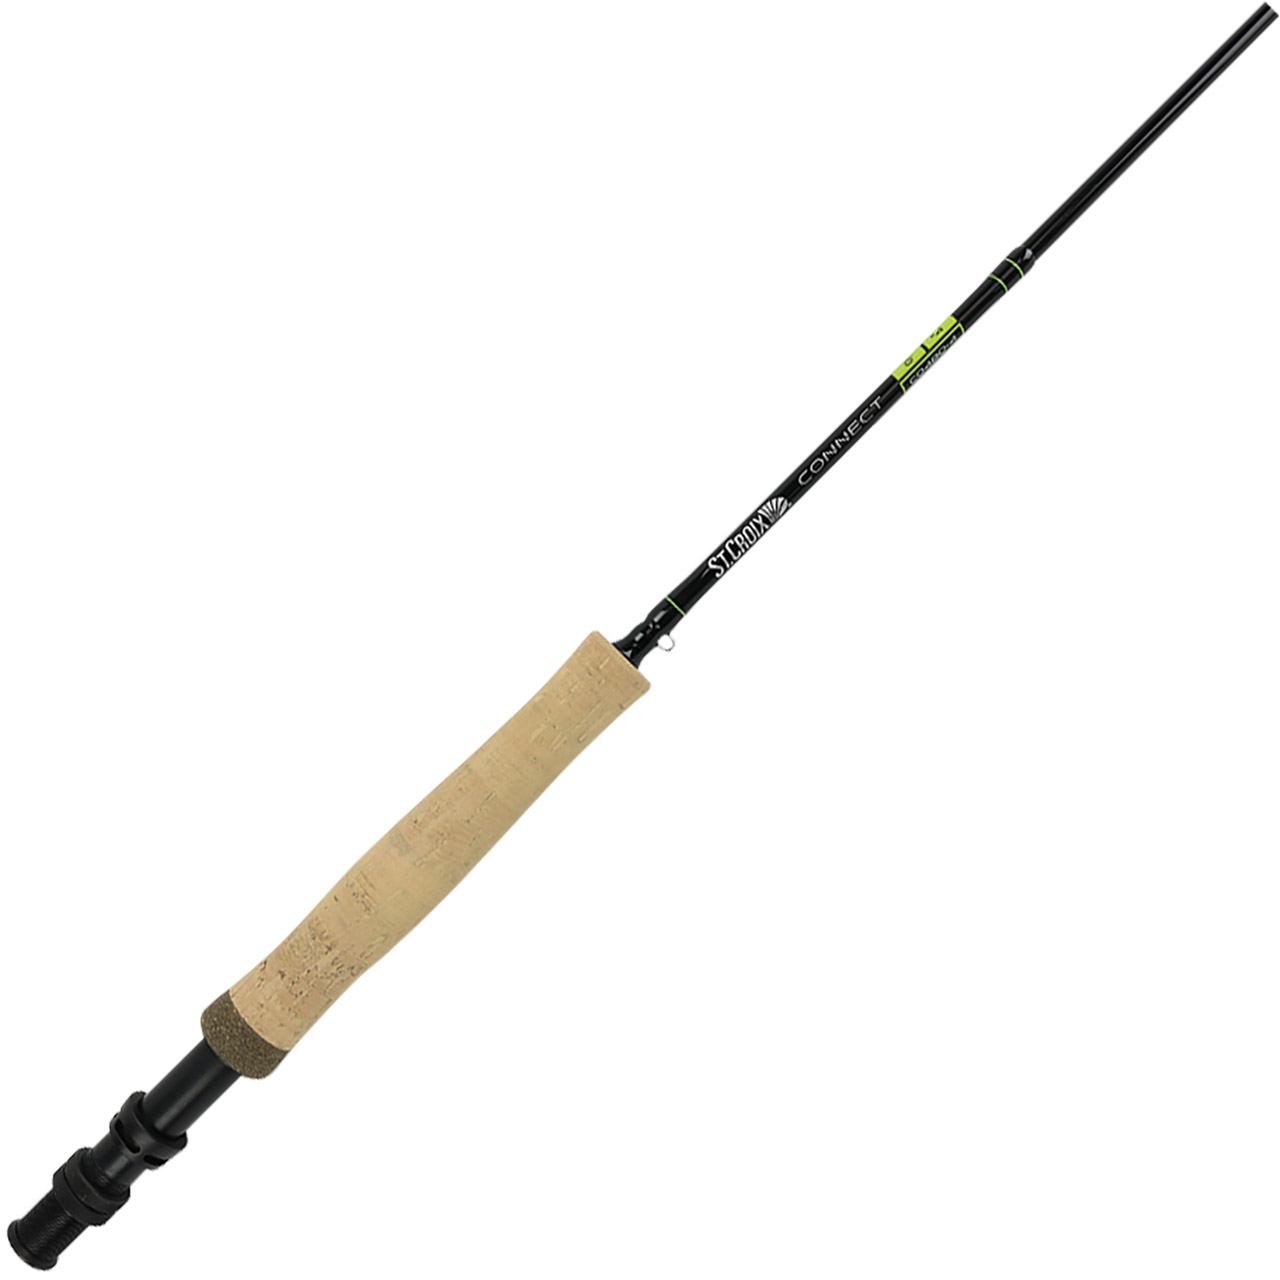 Super lightweight hard fishing rod case with fly rod tube carry